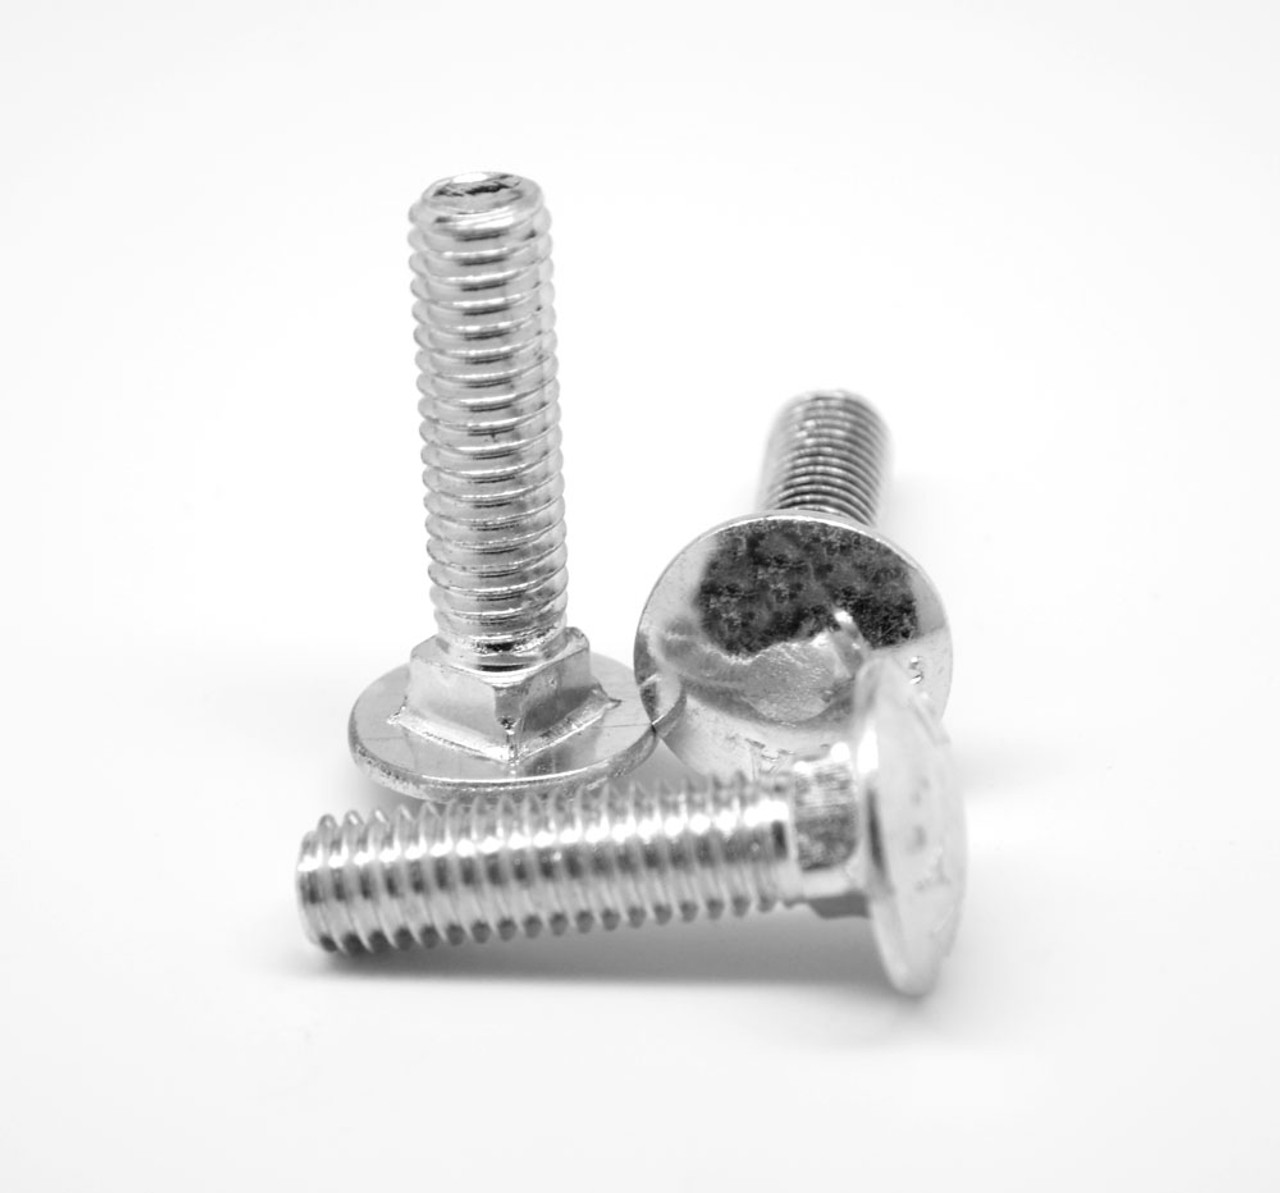 M8 x 1.25 x 60 MM (FT) Coarse Thread DIN 603 Class 4.6 Carriage Bolt Low Carbon Steel Zinc Plated